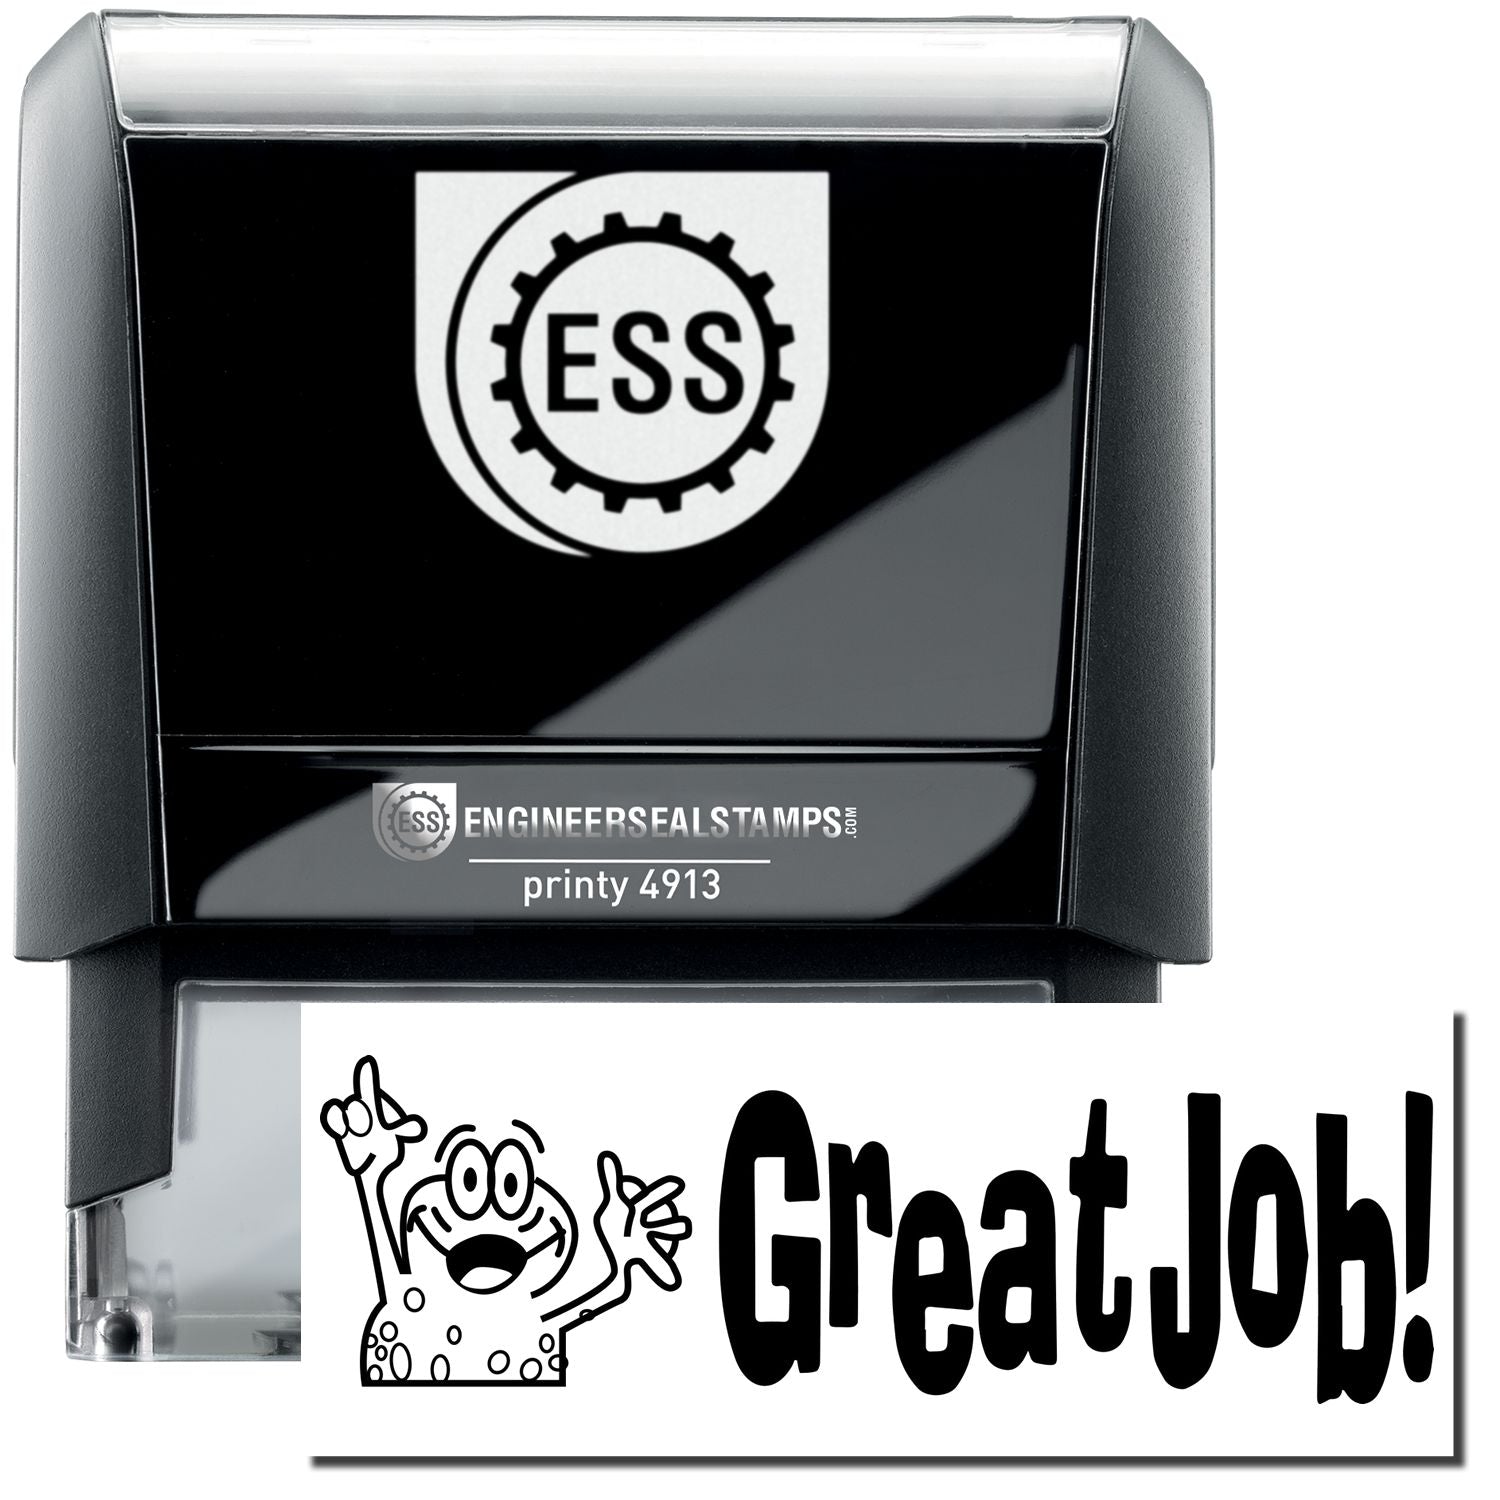 A self-inking stamp with a stamped image showing how the text "Great Job!" in a large font with an image of a frog (on the left side of the text whose hands are up in the air) is displayed by it after stamping.